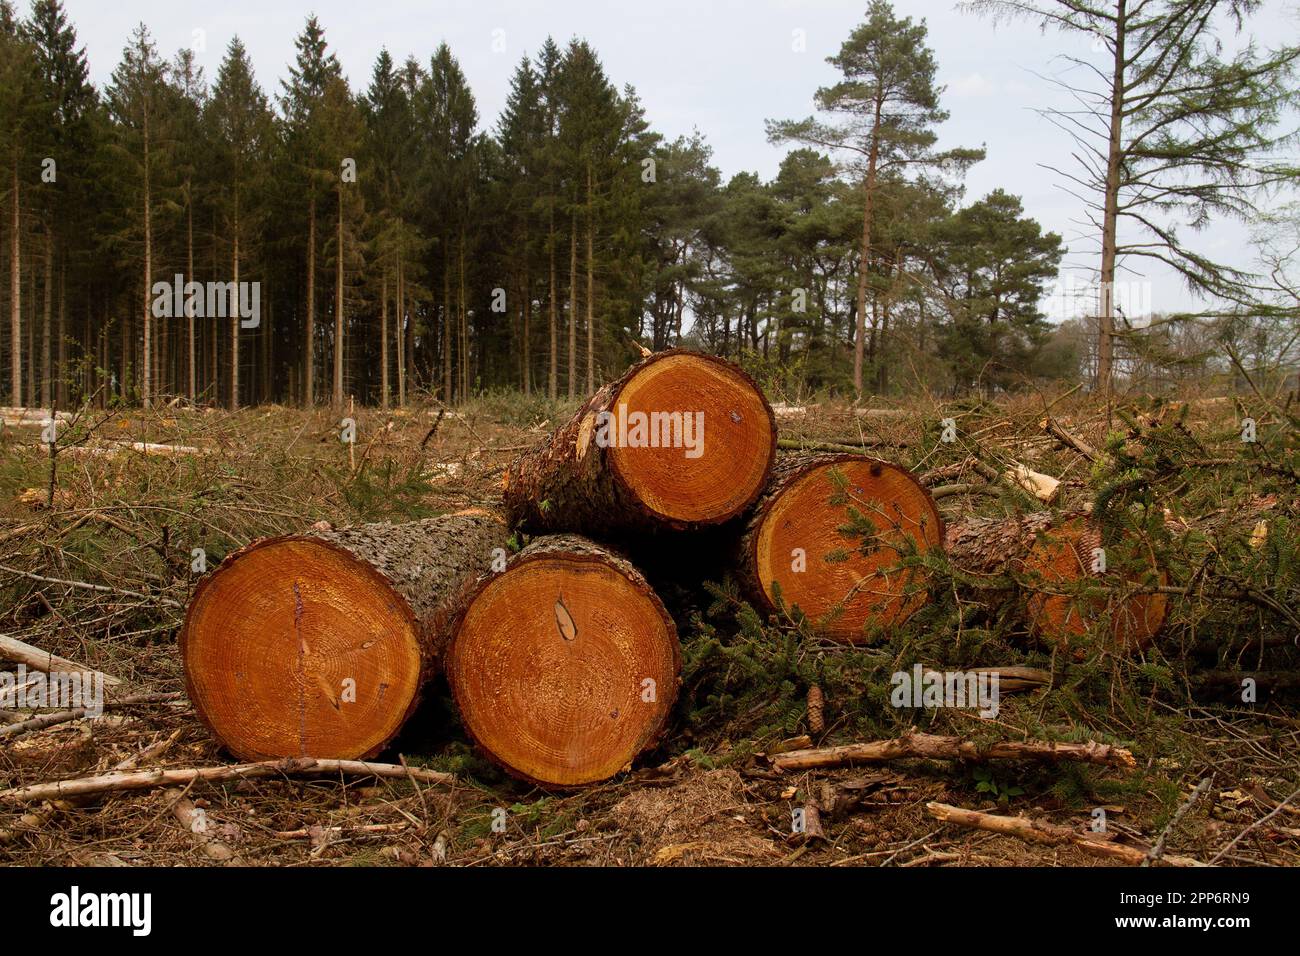 Forest management: a felling plain in a forest, pile of tree trunks in the foreground Stock Photo